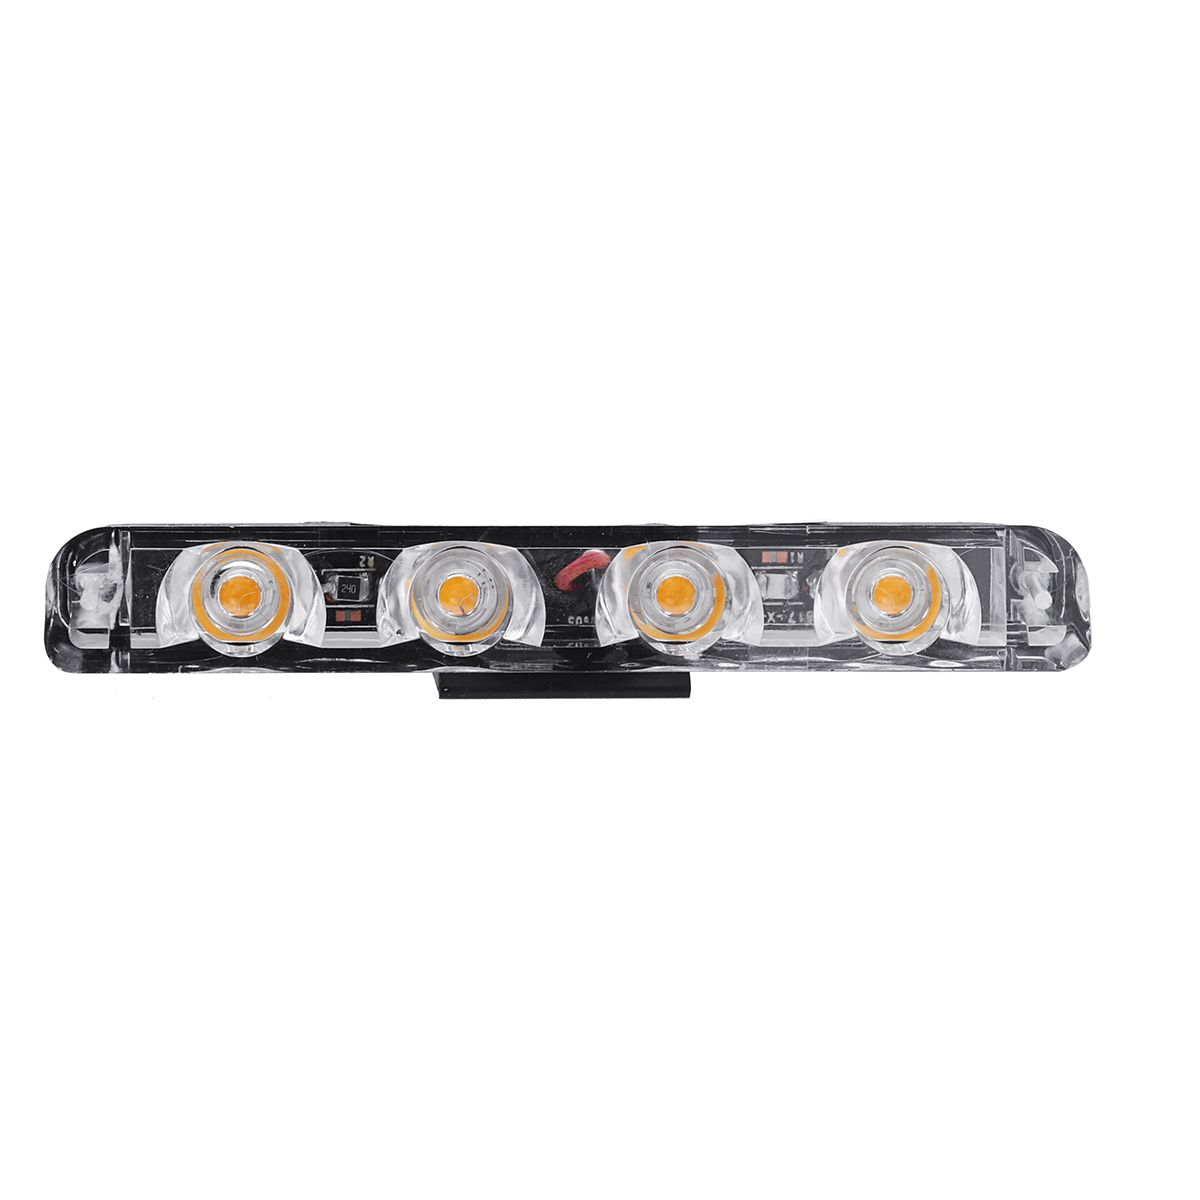 16W-4-in-1-16-LED-Strobe-Lights-Bumper-Grille-Warning-Lamp-with-Controller-Mode-Switch-1606115